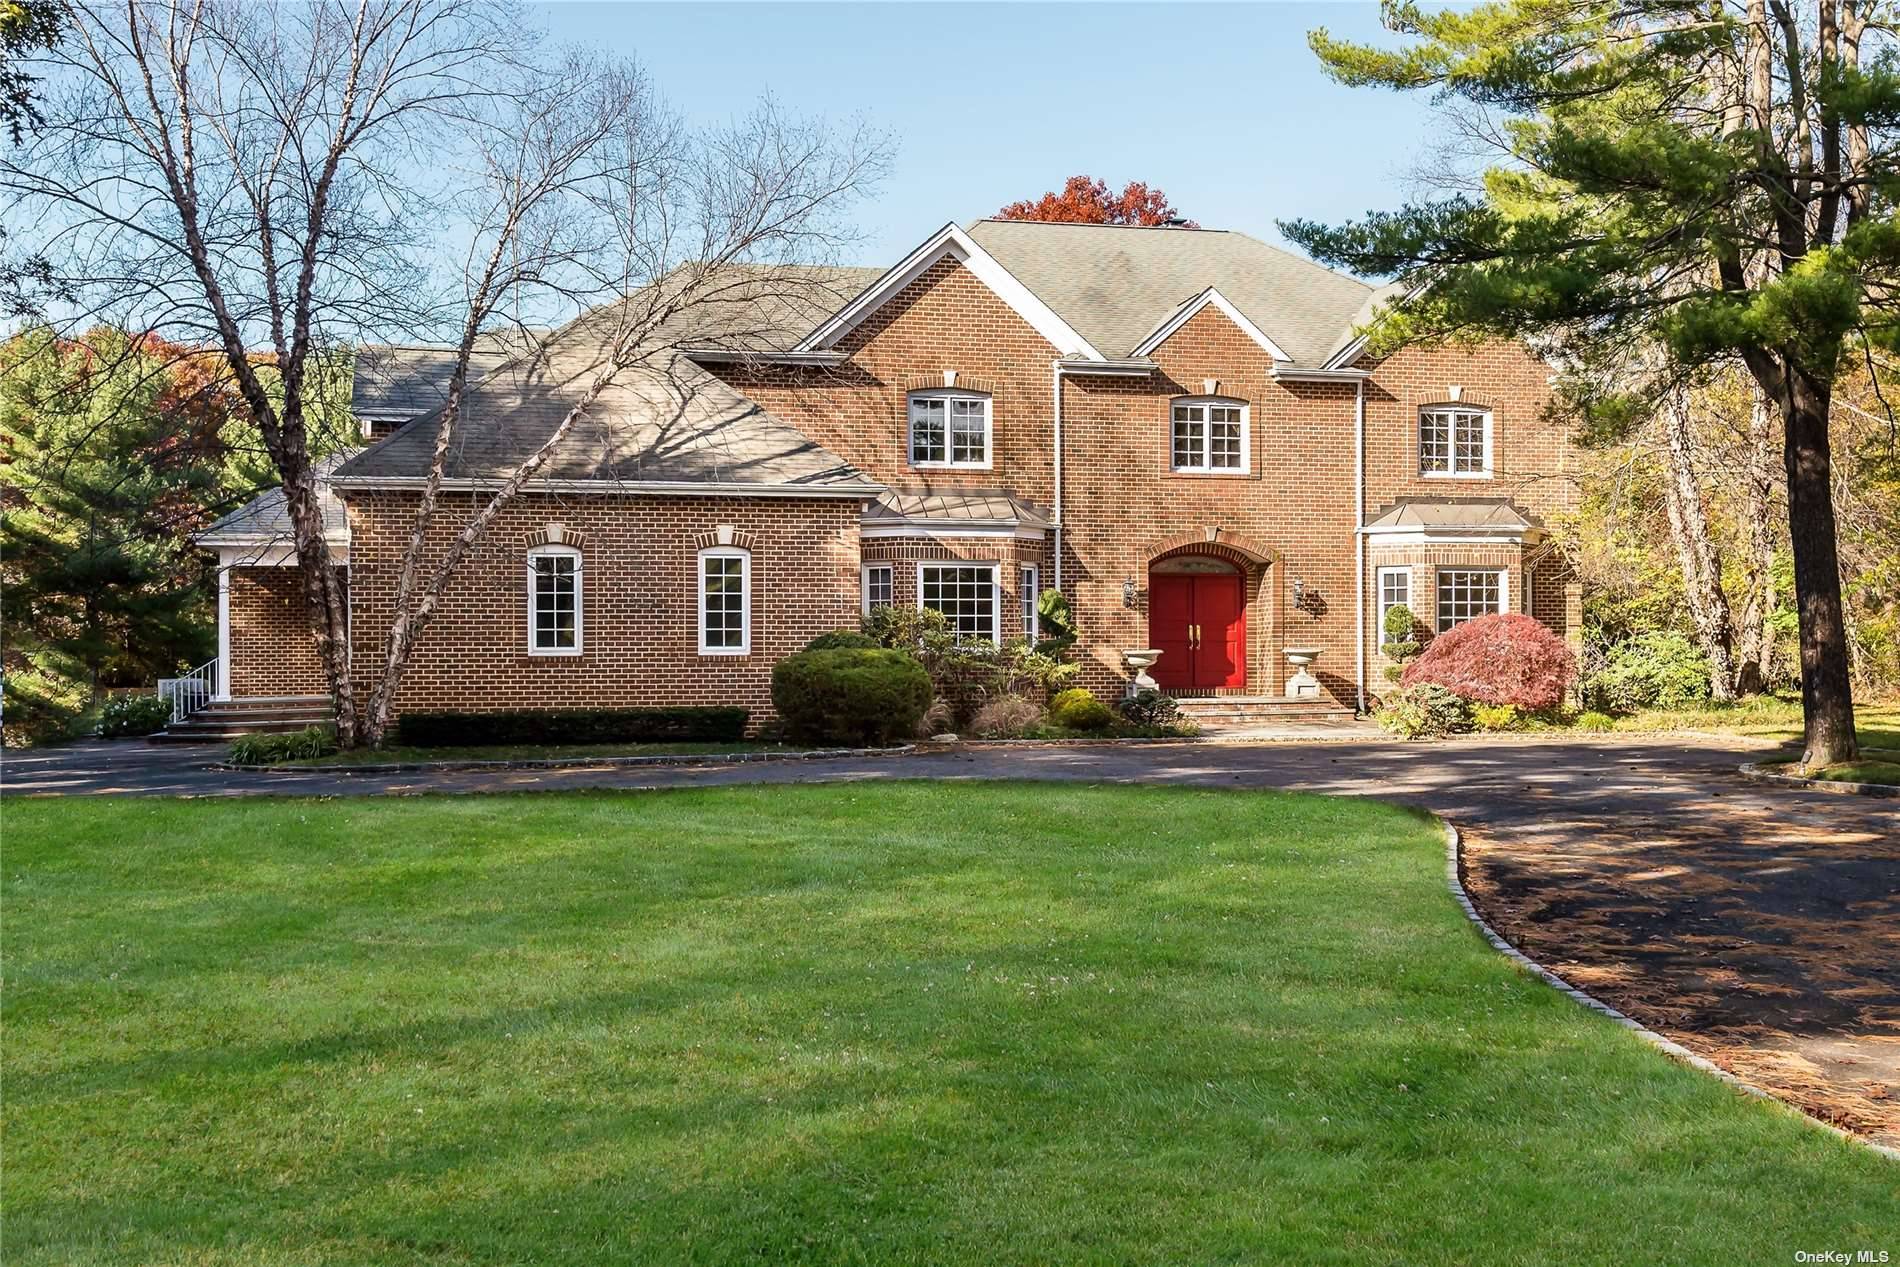 Traditional Brick Colonial located on a private road.